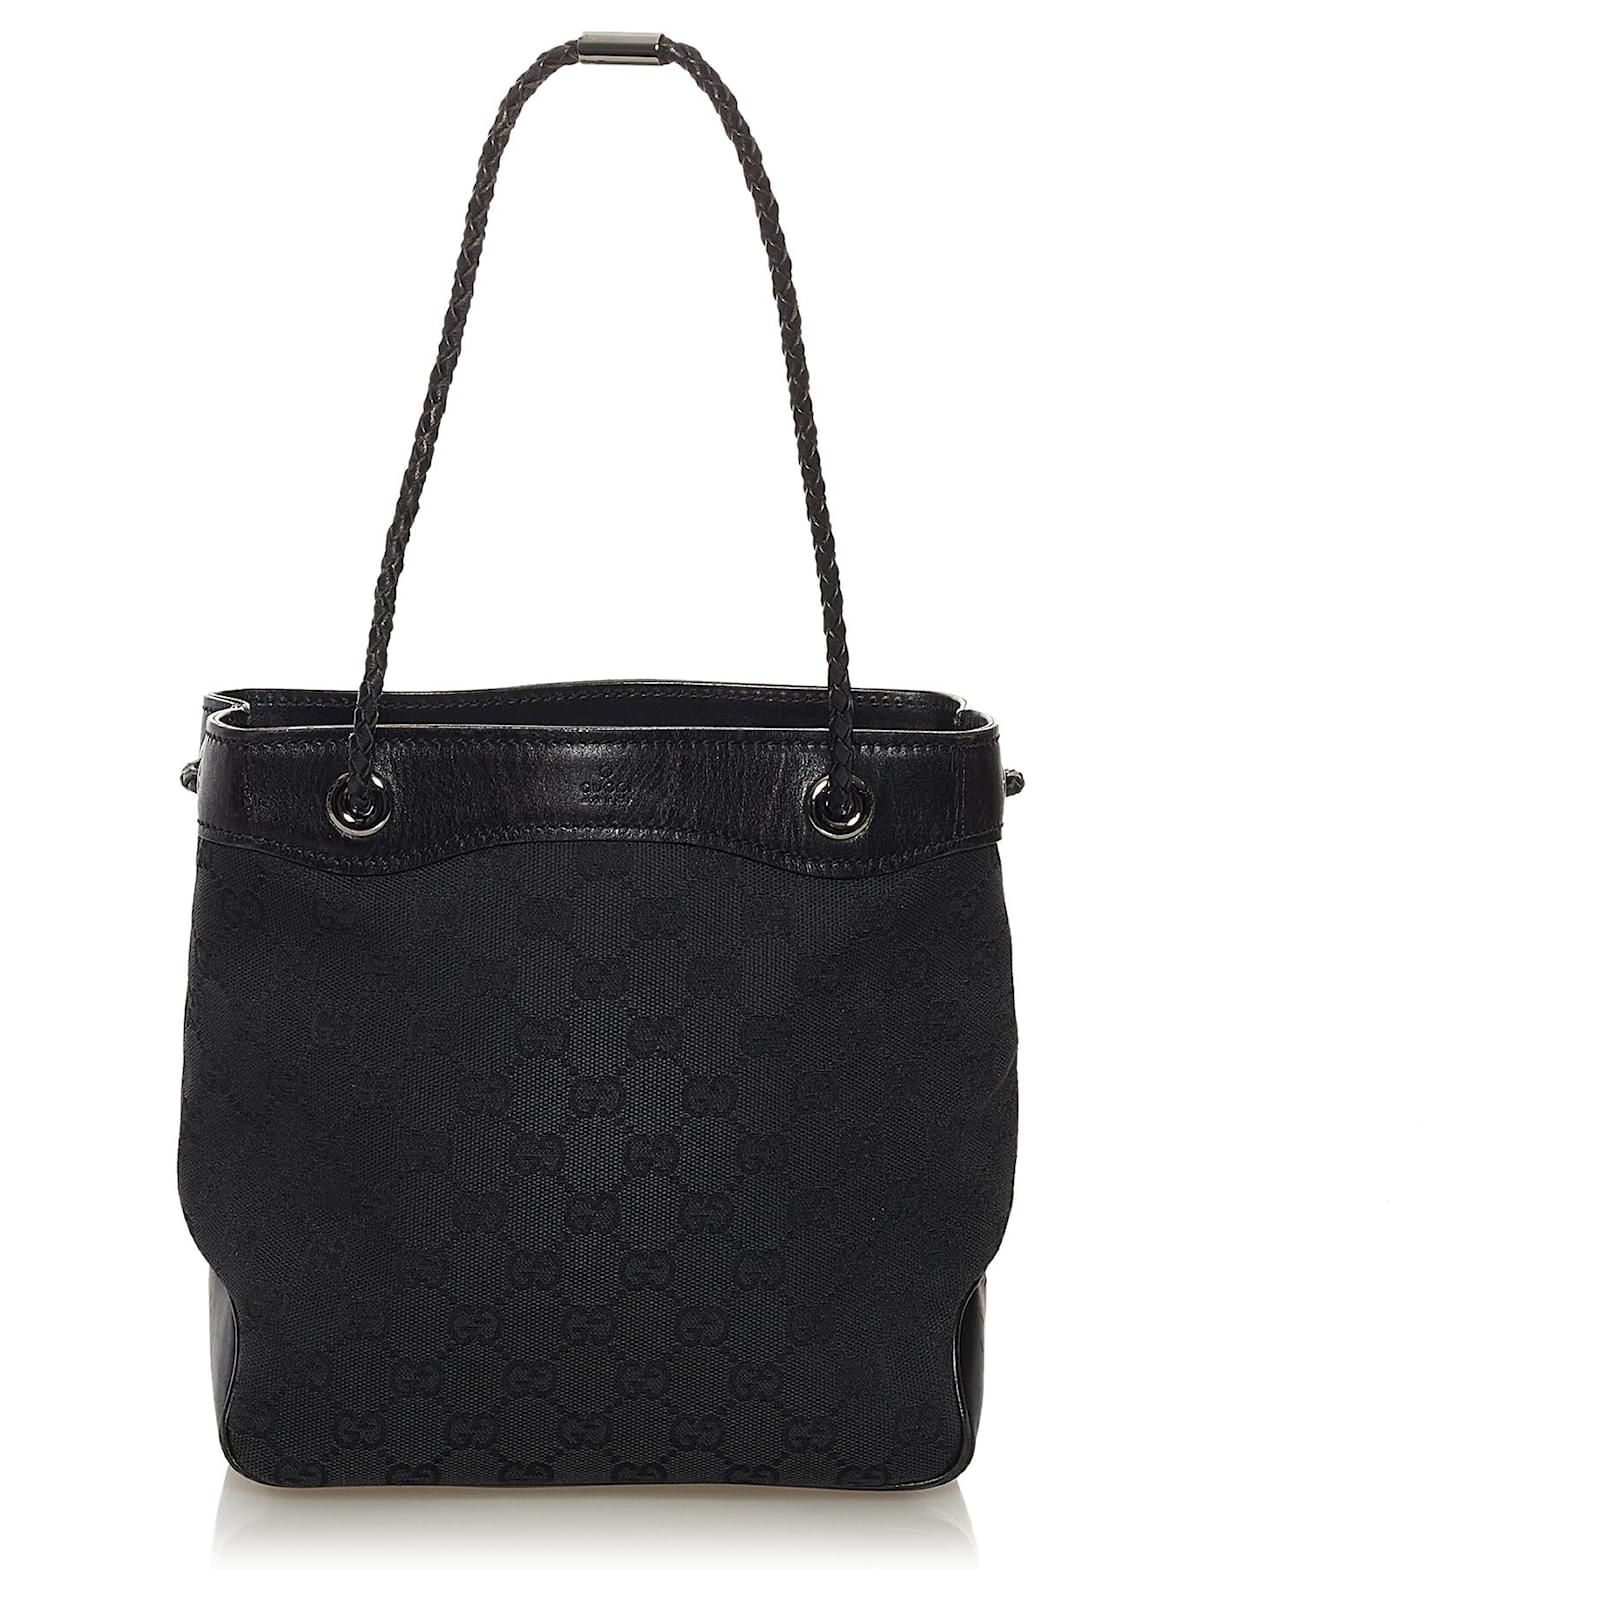 Gucci Black GG Canvas Gifford Tote Bag Leather Cloth Pony-style ...